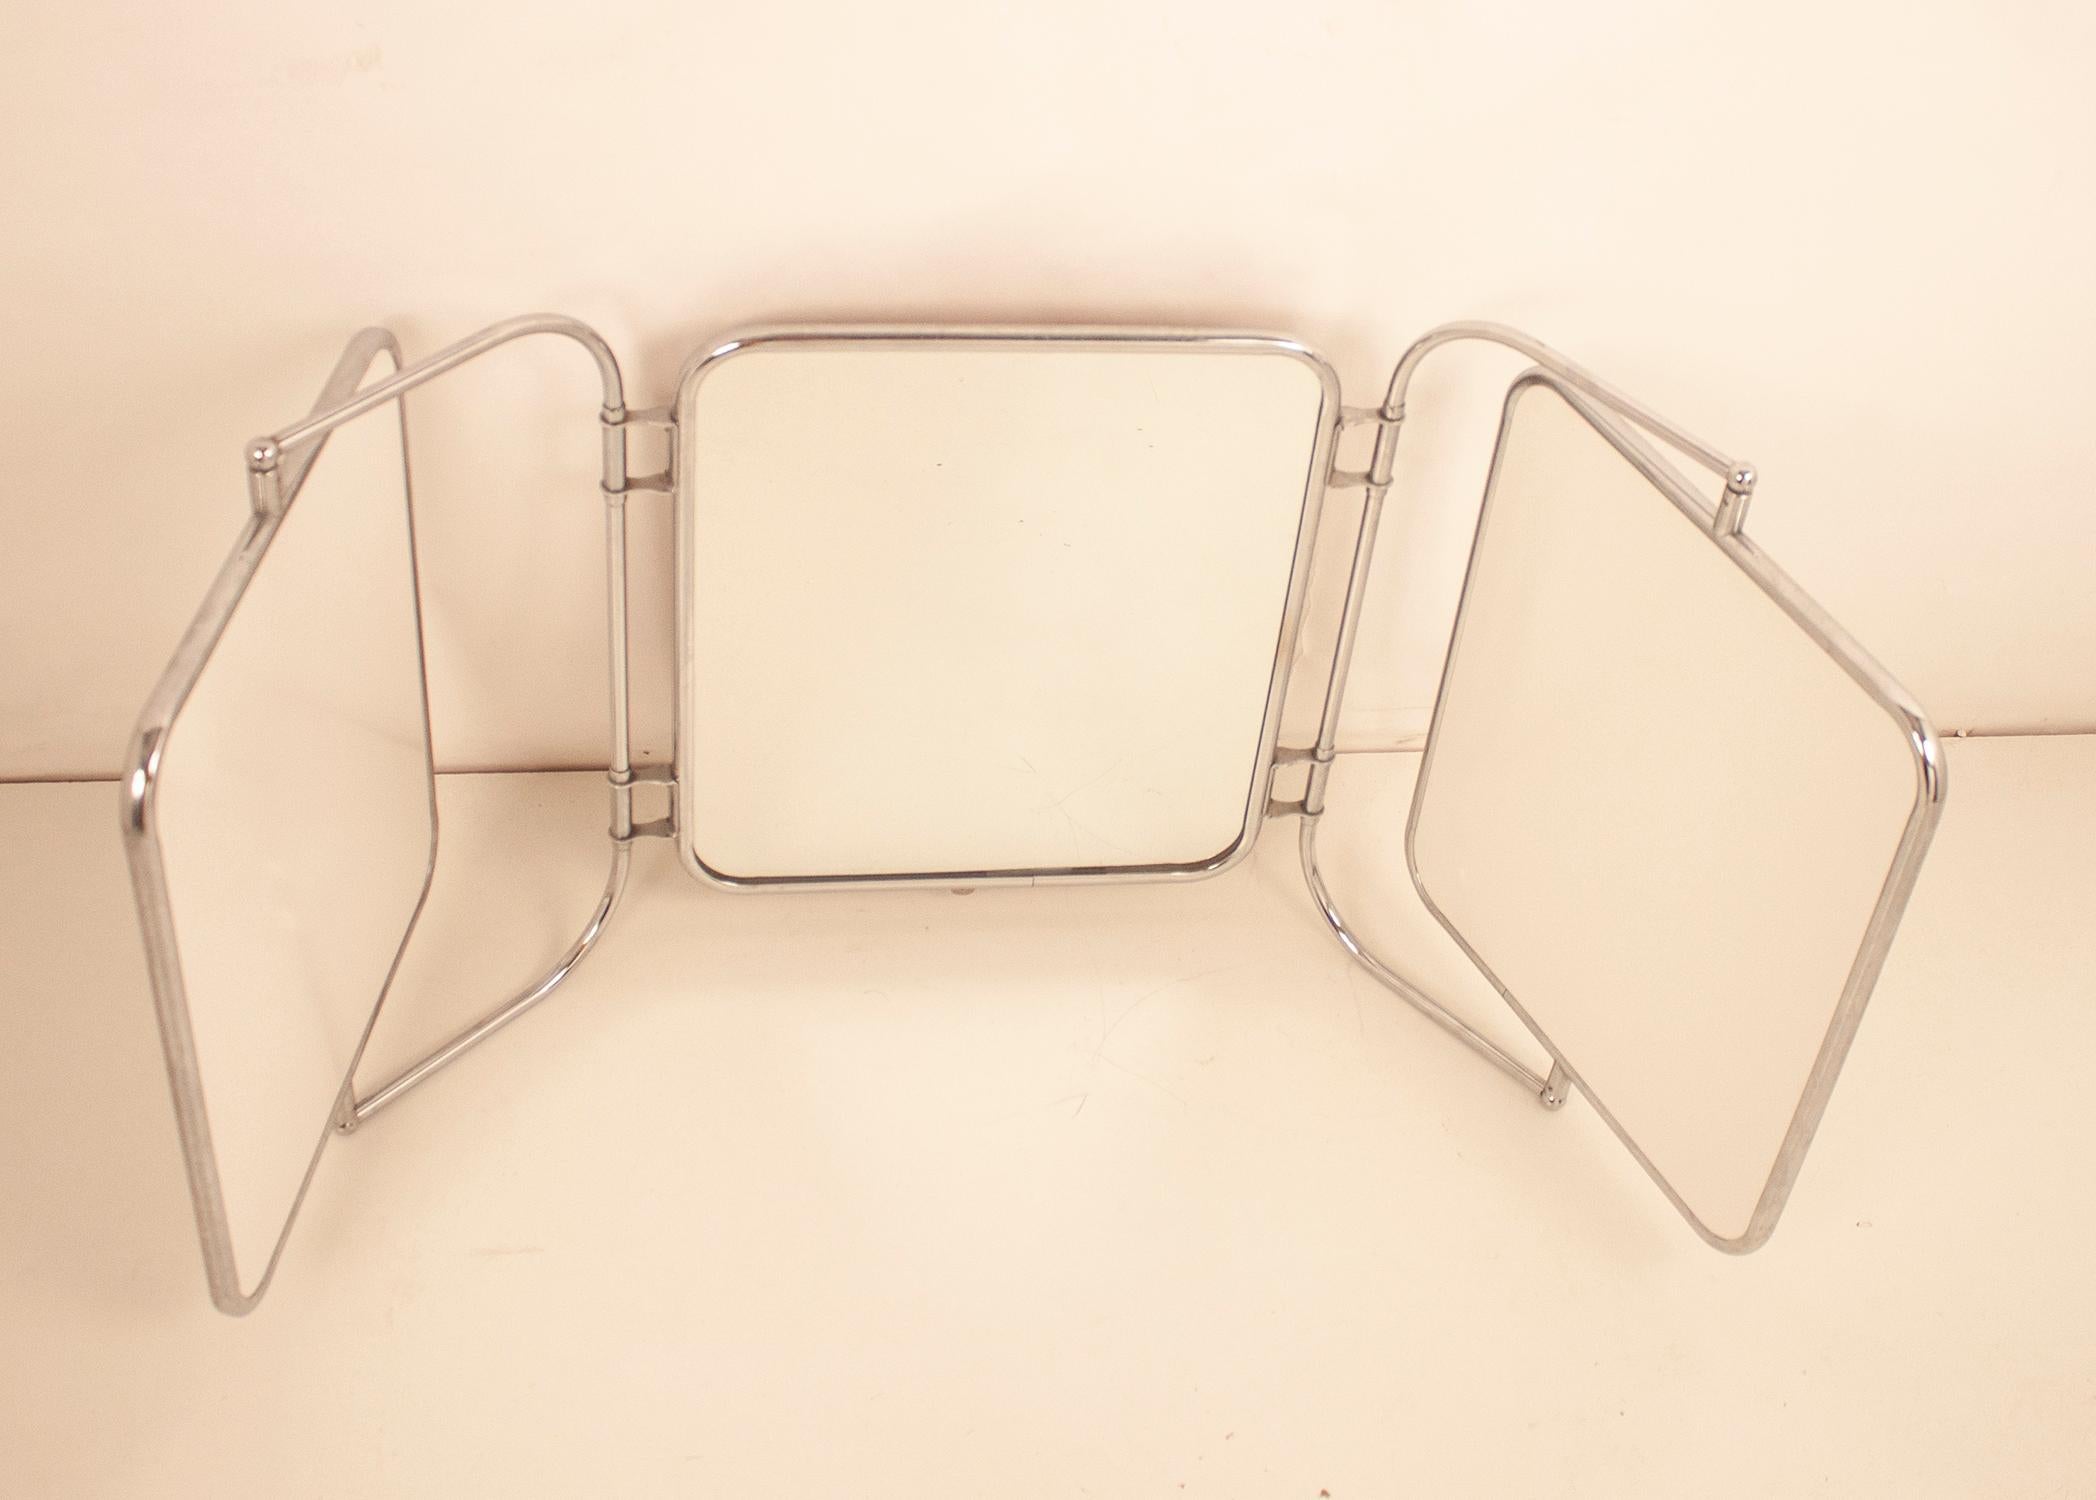 Mid-20th Century Midcentury Triptych Wall Mirror, White Bakelite and Chrome, Spain, 1940s